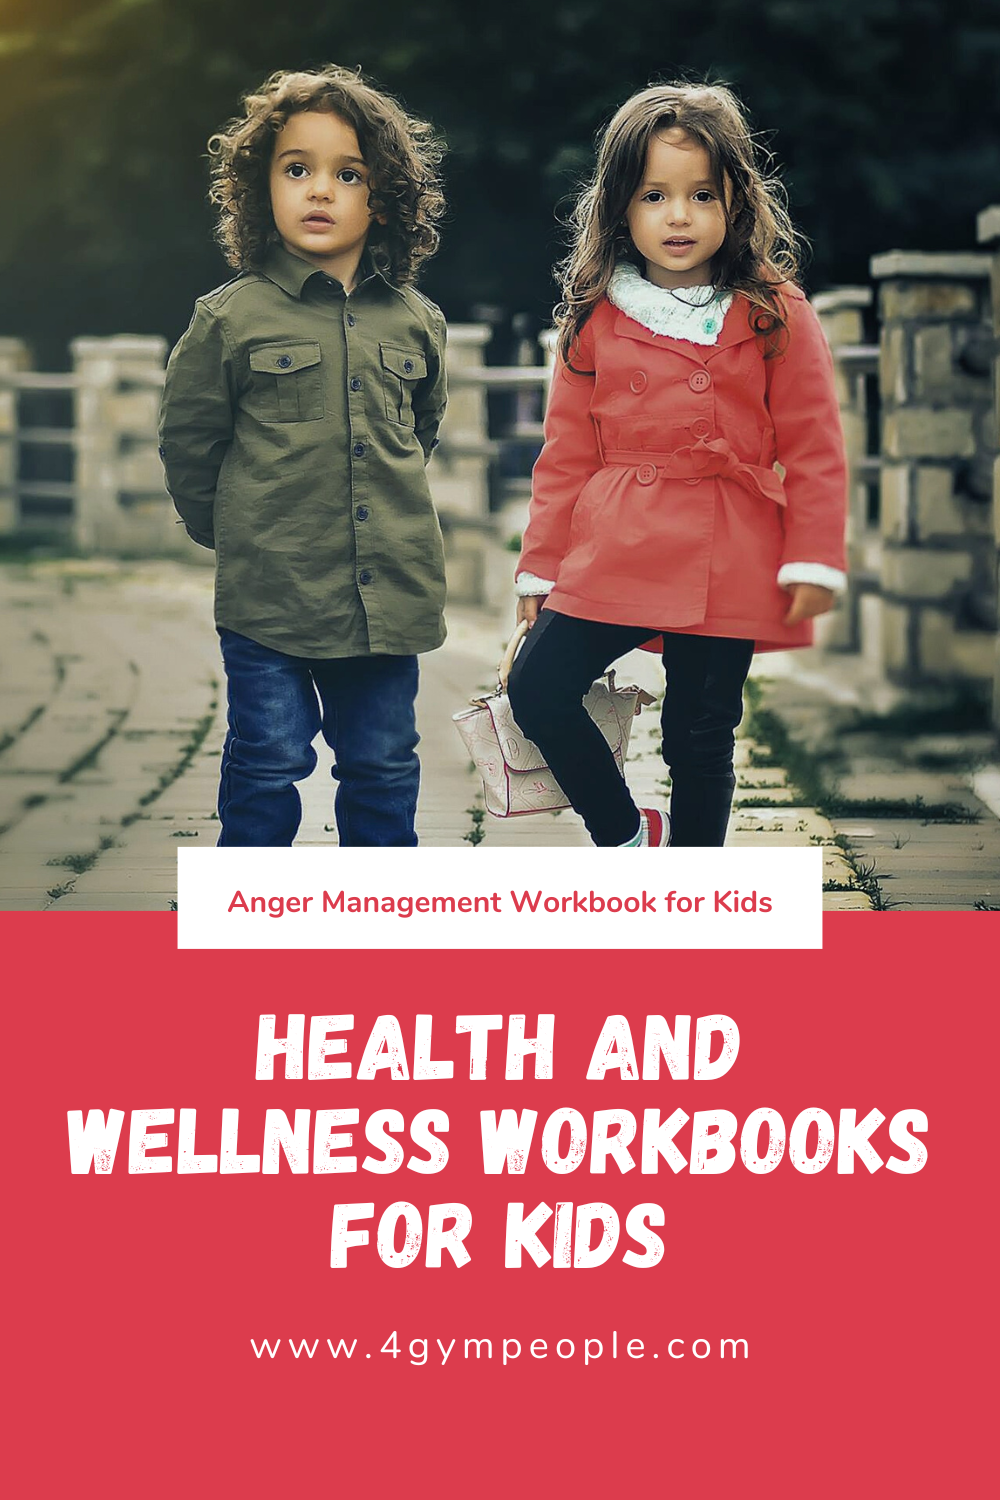 Empowering Young Minds: A Comprehensive Review of Health and Wellness Workbooks for Kids